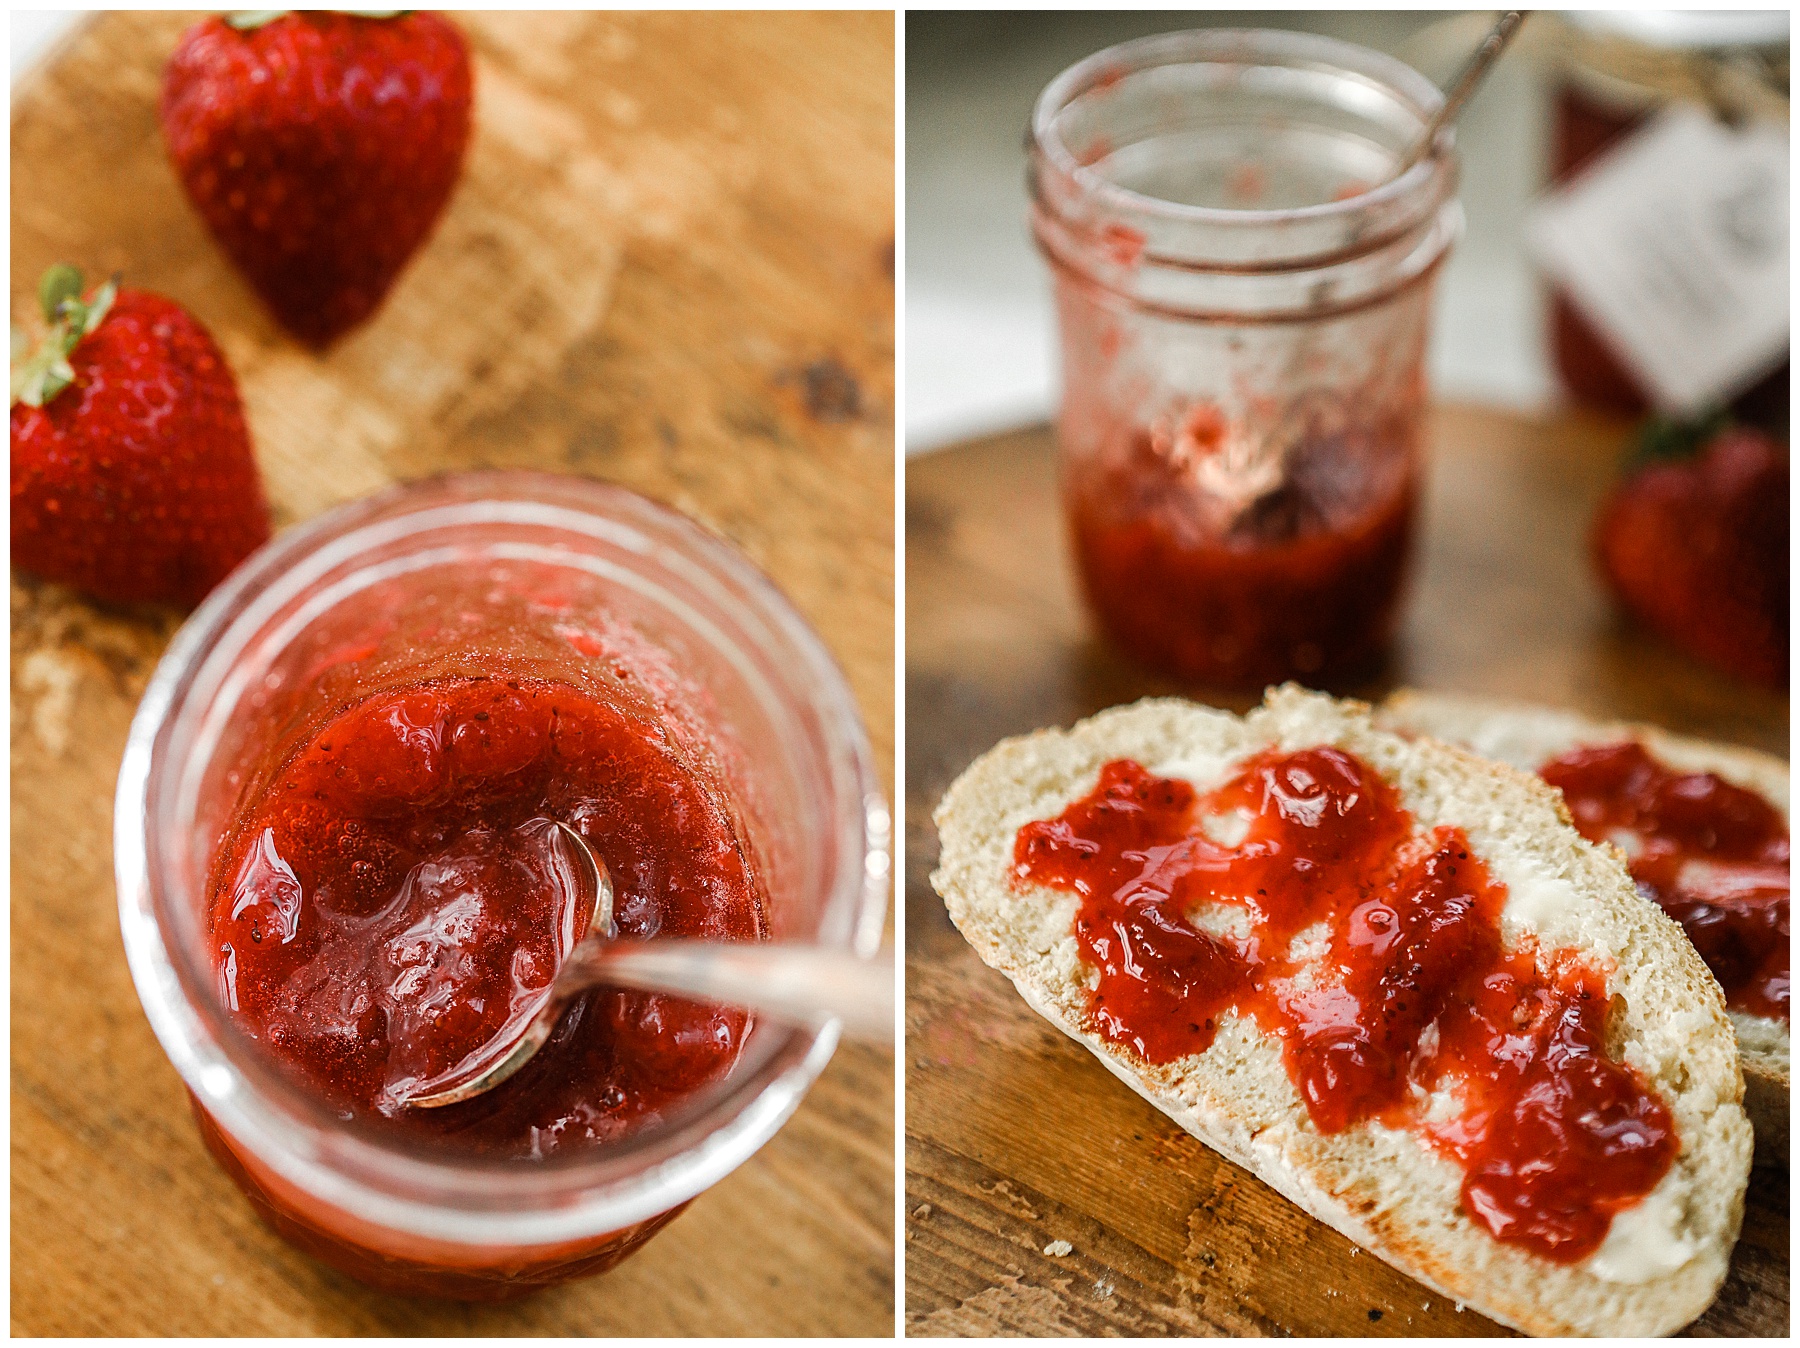 Homemade strawberry jam with fresh Dutch oven bread